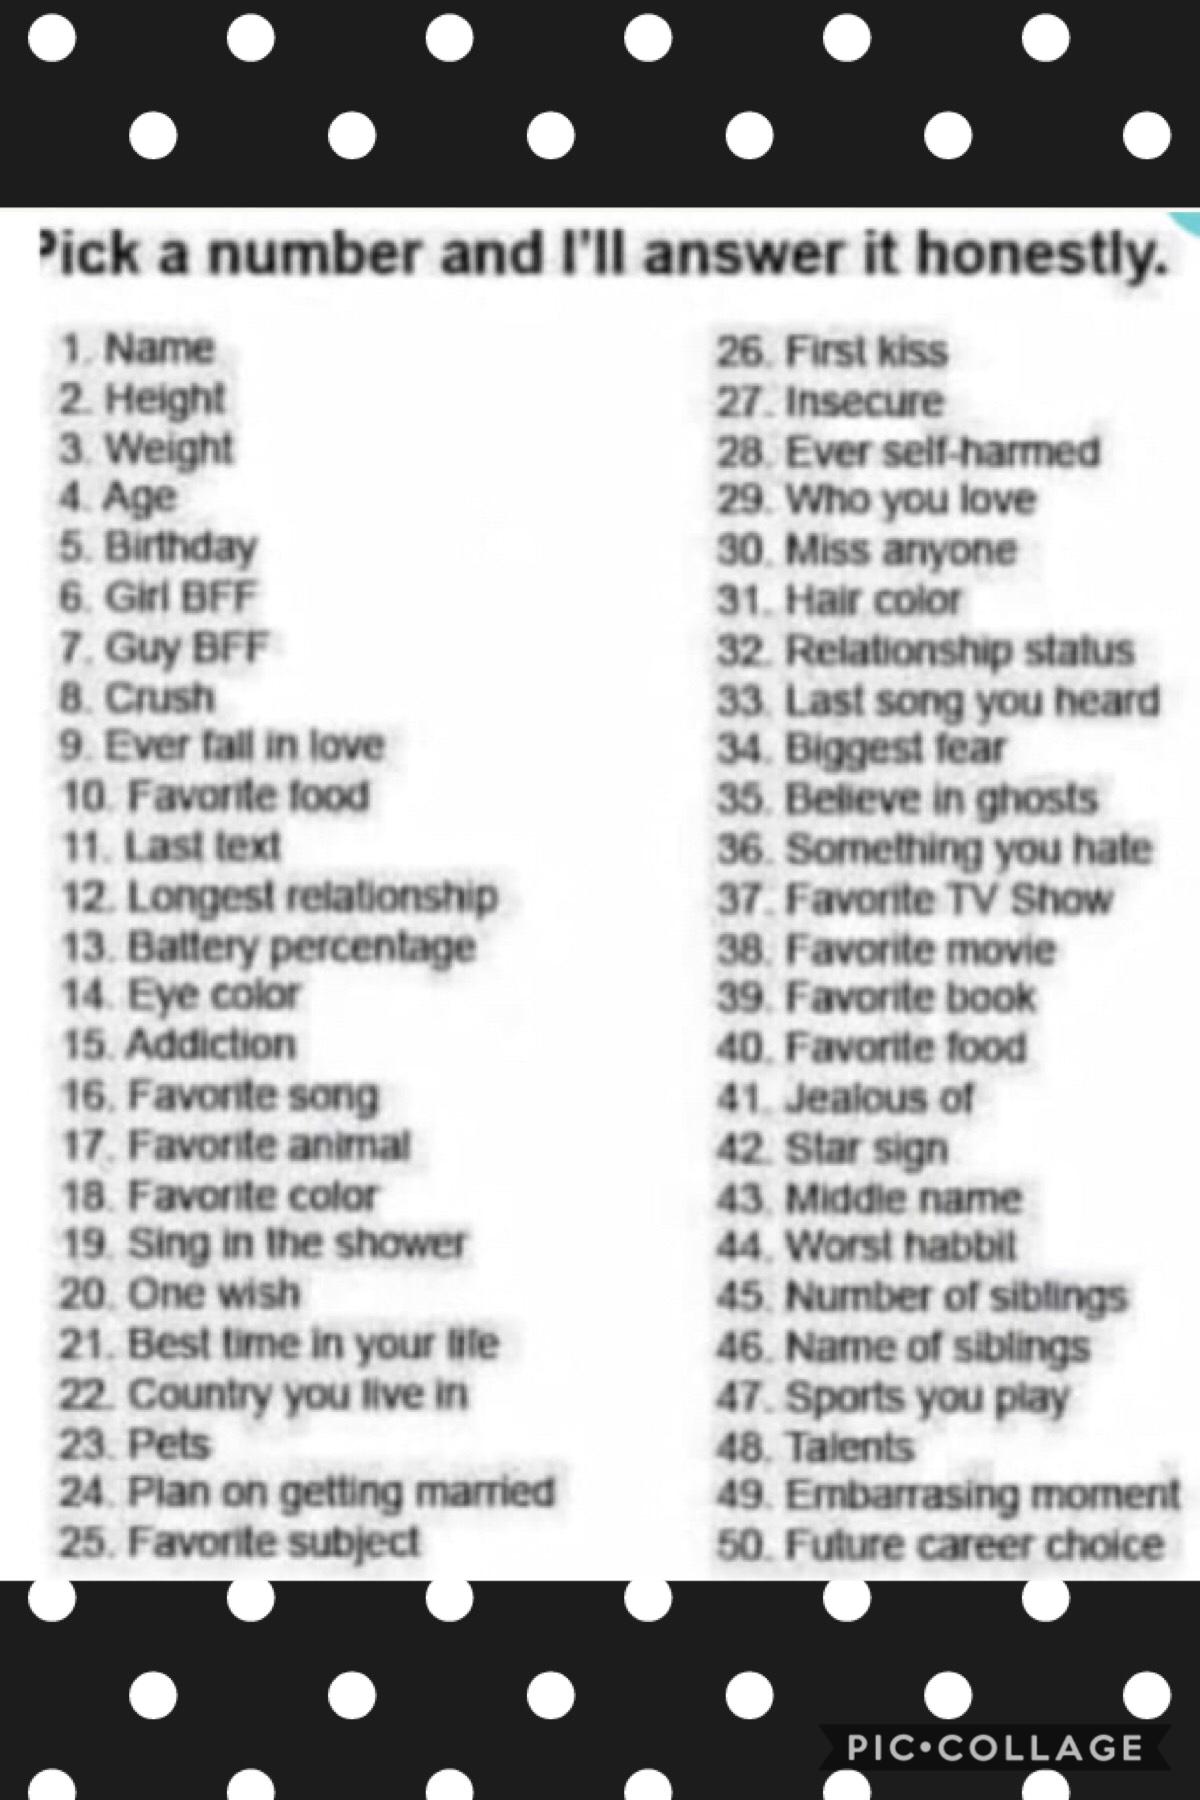 Pick any number and I’ll answer honestly 